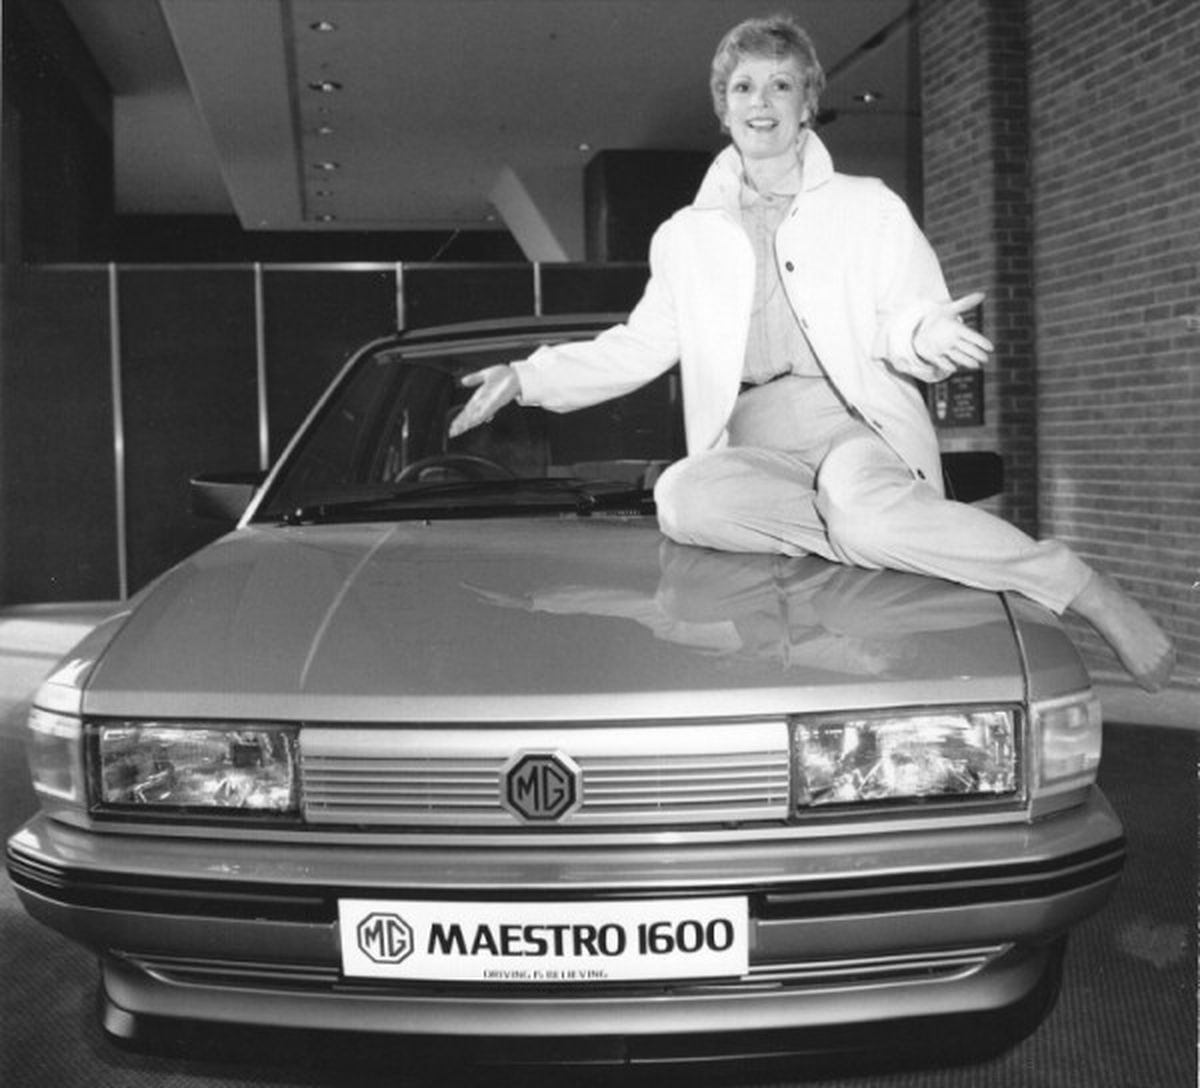 Austin Maestro at 40 – the famous talking car which hit the wrong note